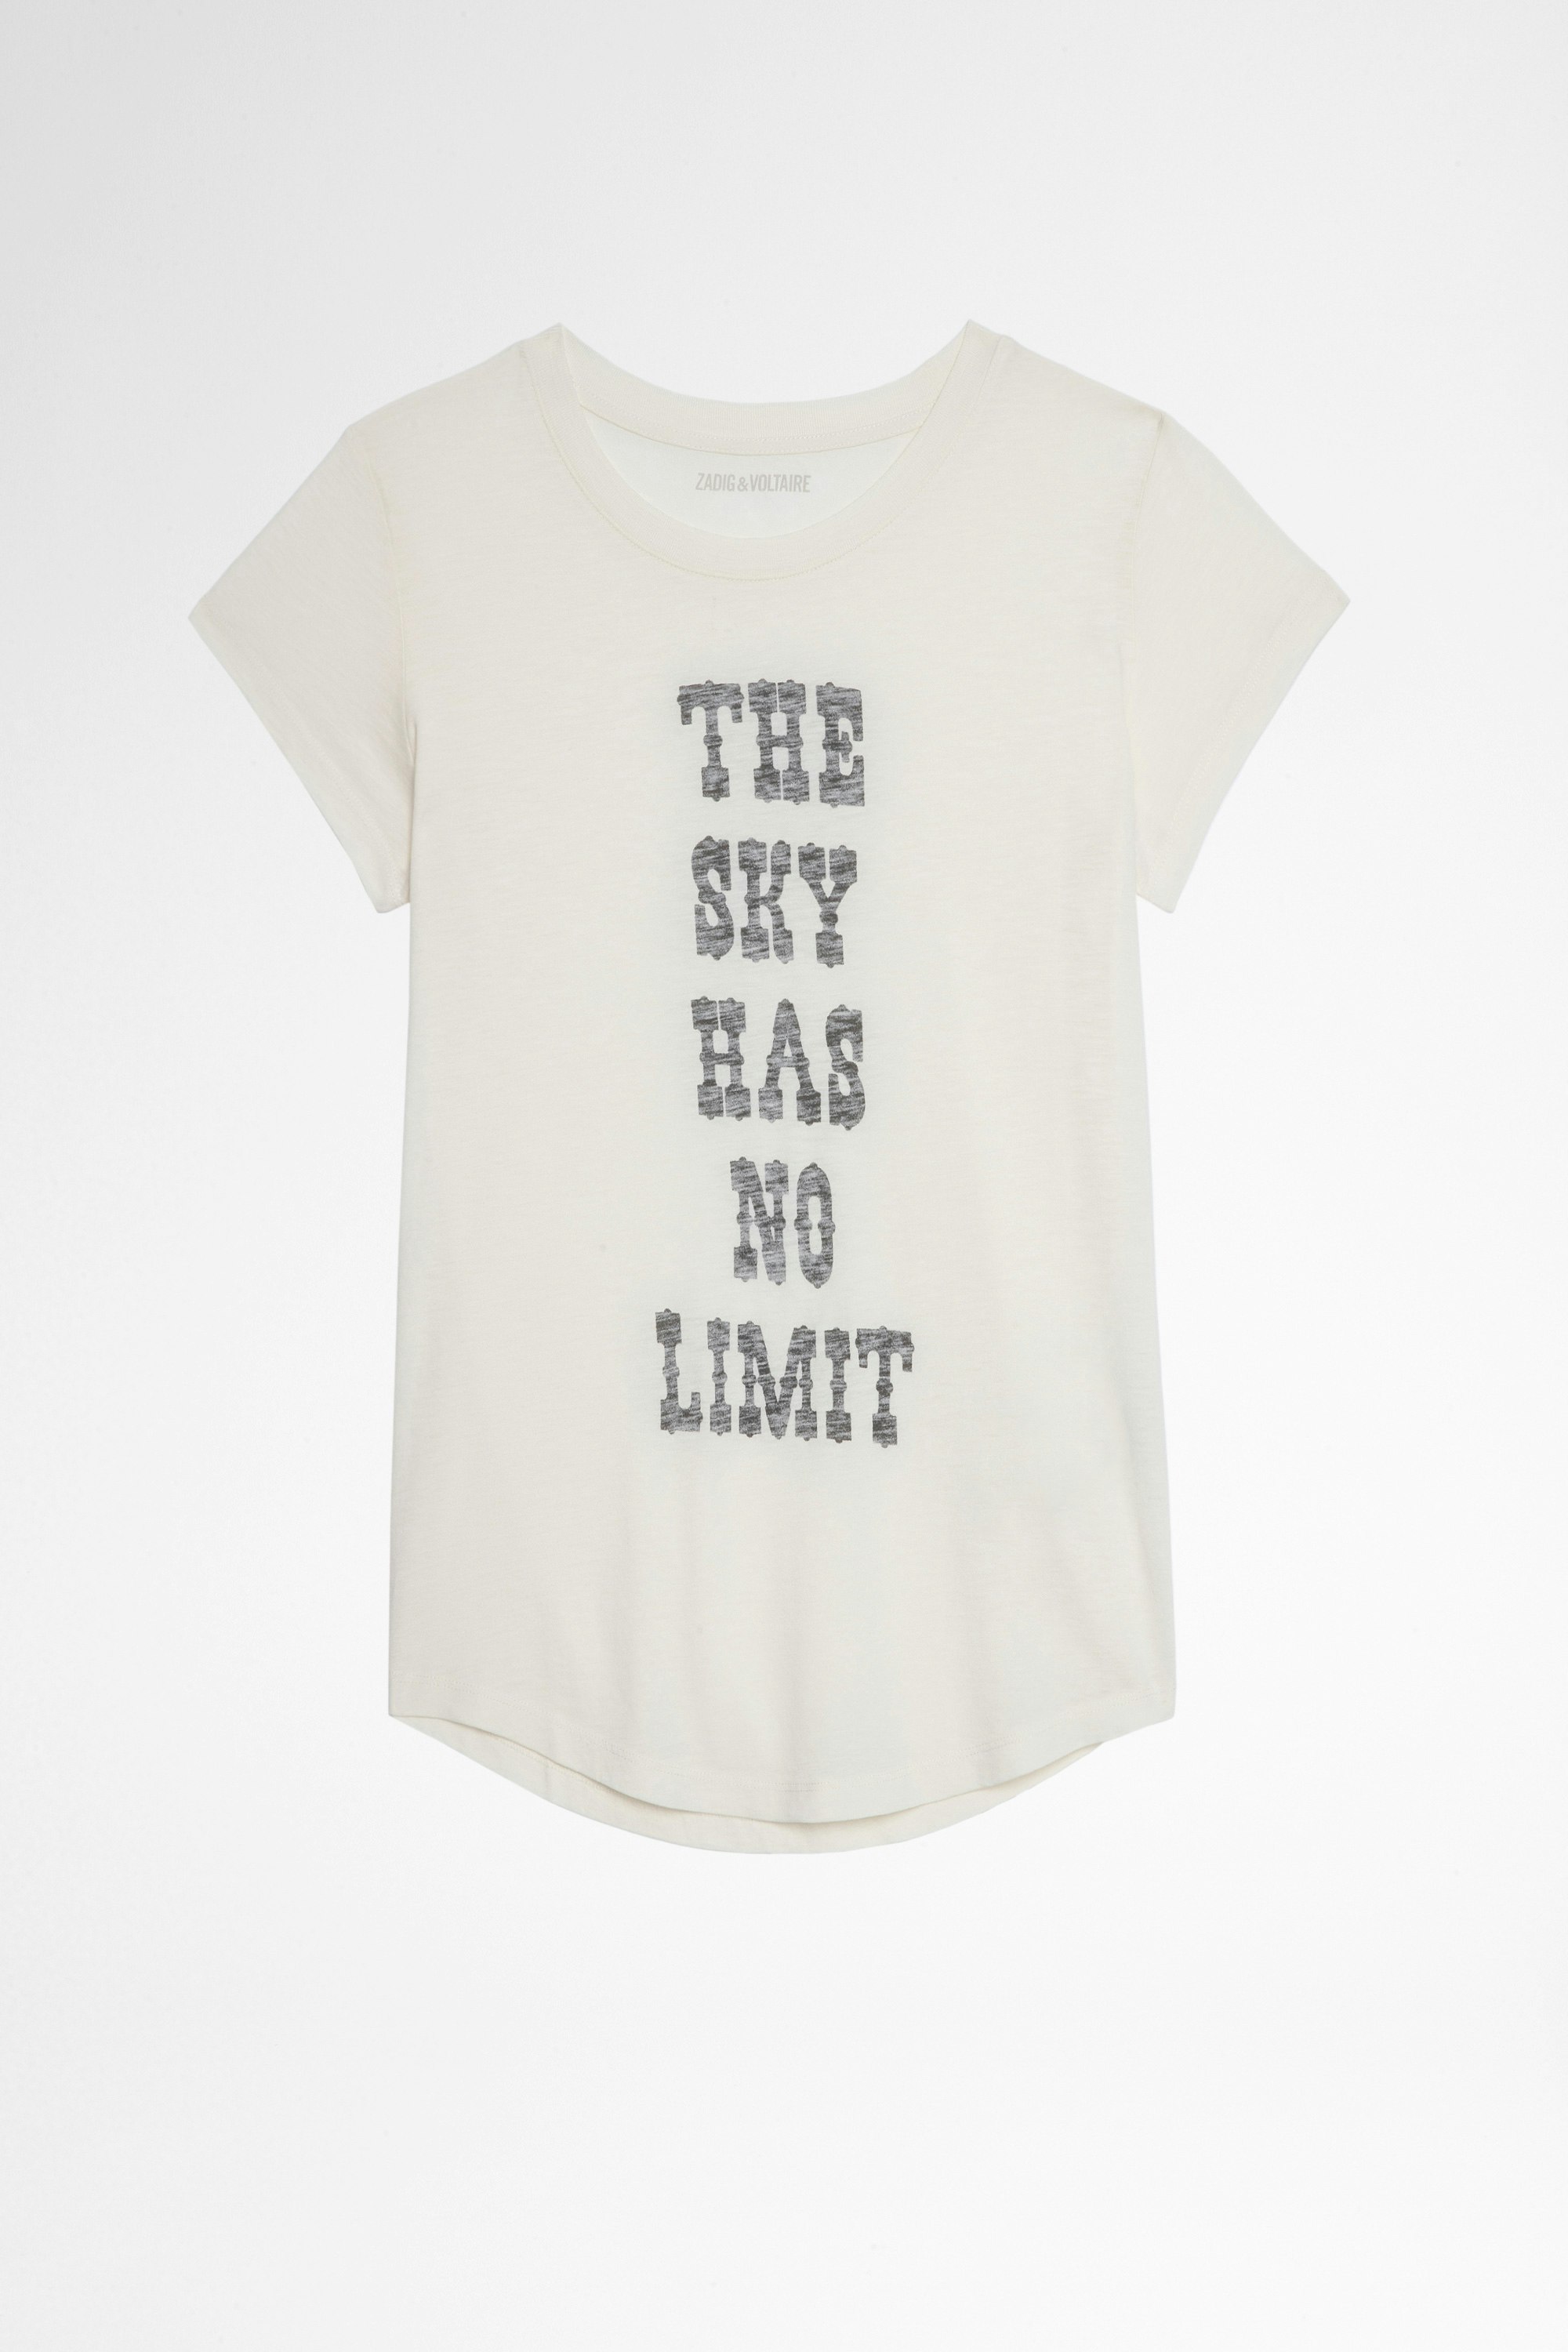 T-shirt Woop Weißes T-shirt The Sky has no limit